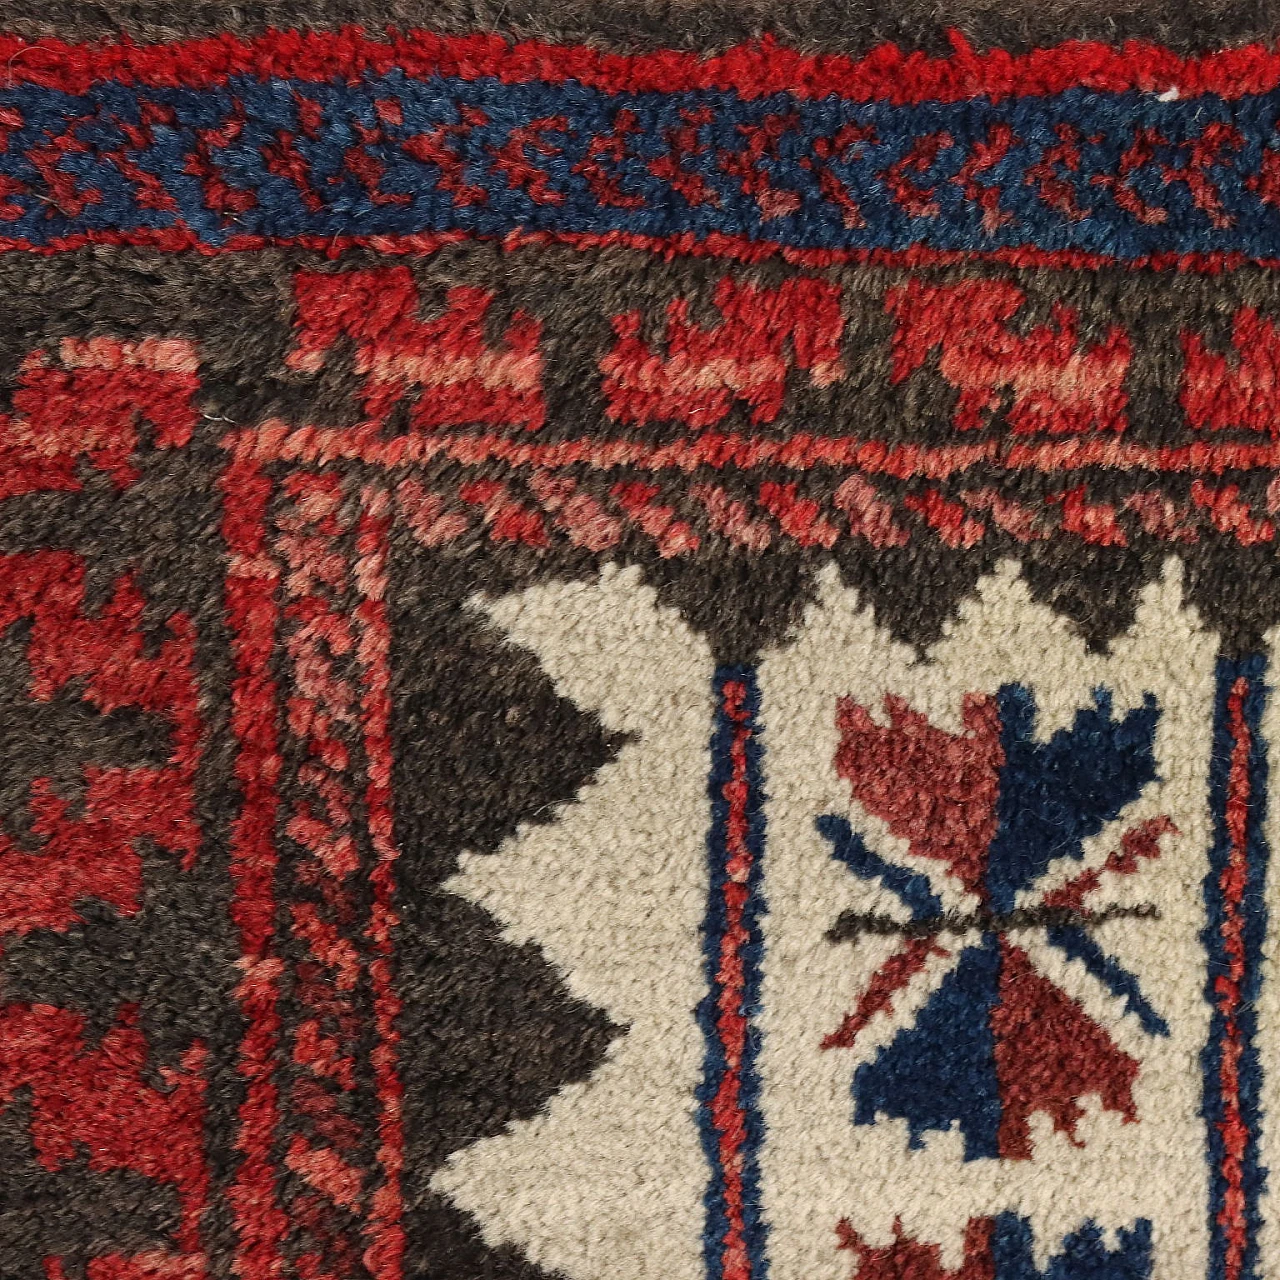 Iranian red, blue and beige wool Beluchi rug 4